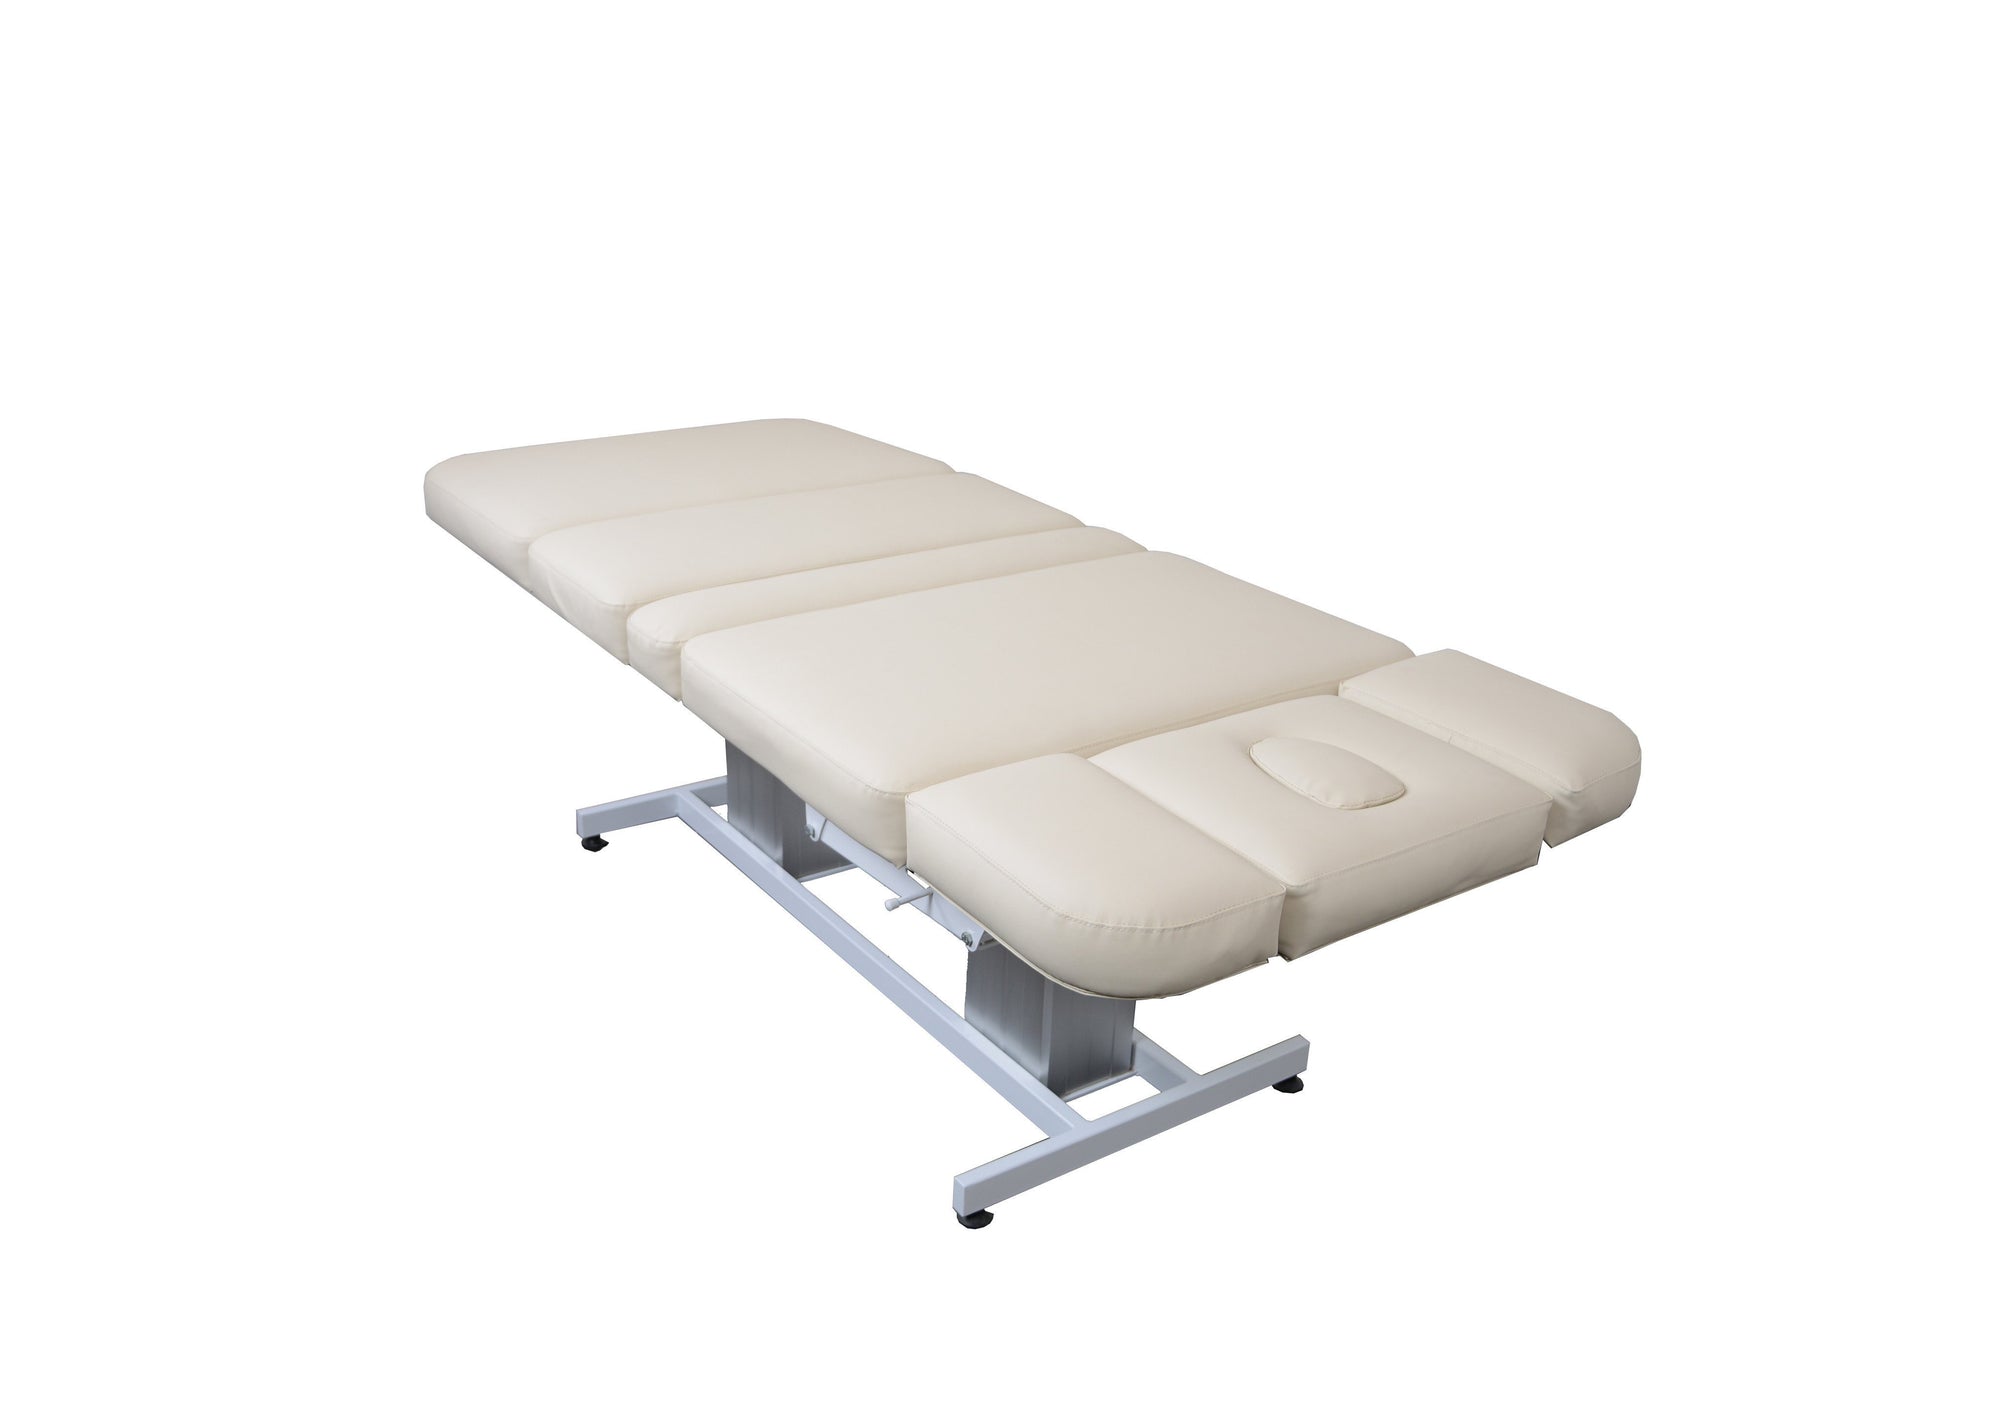 Touch America Touch America Embrace PowerTilt Spa Massage & Treatment Table Massage & Treatment Table - ChairsThatGive